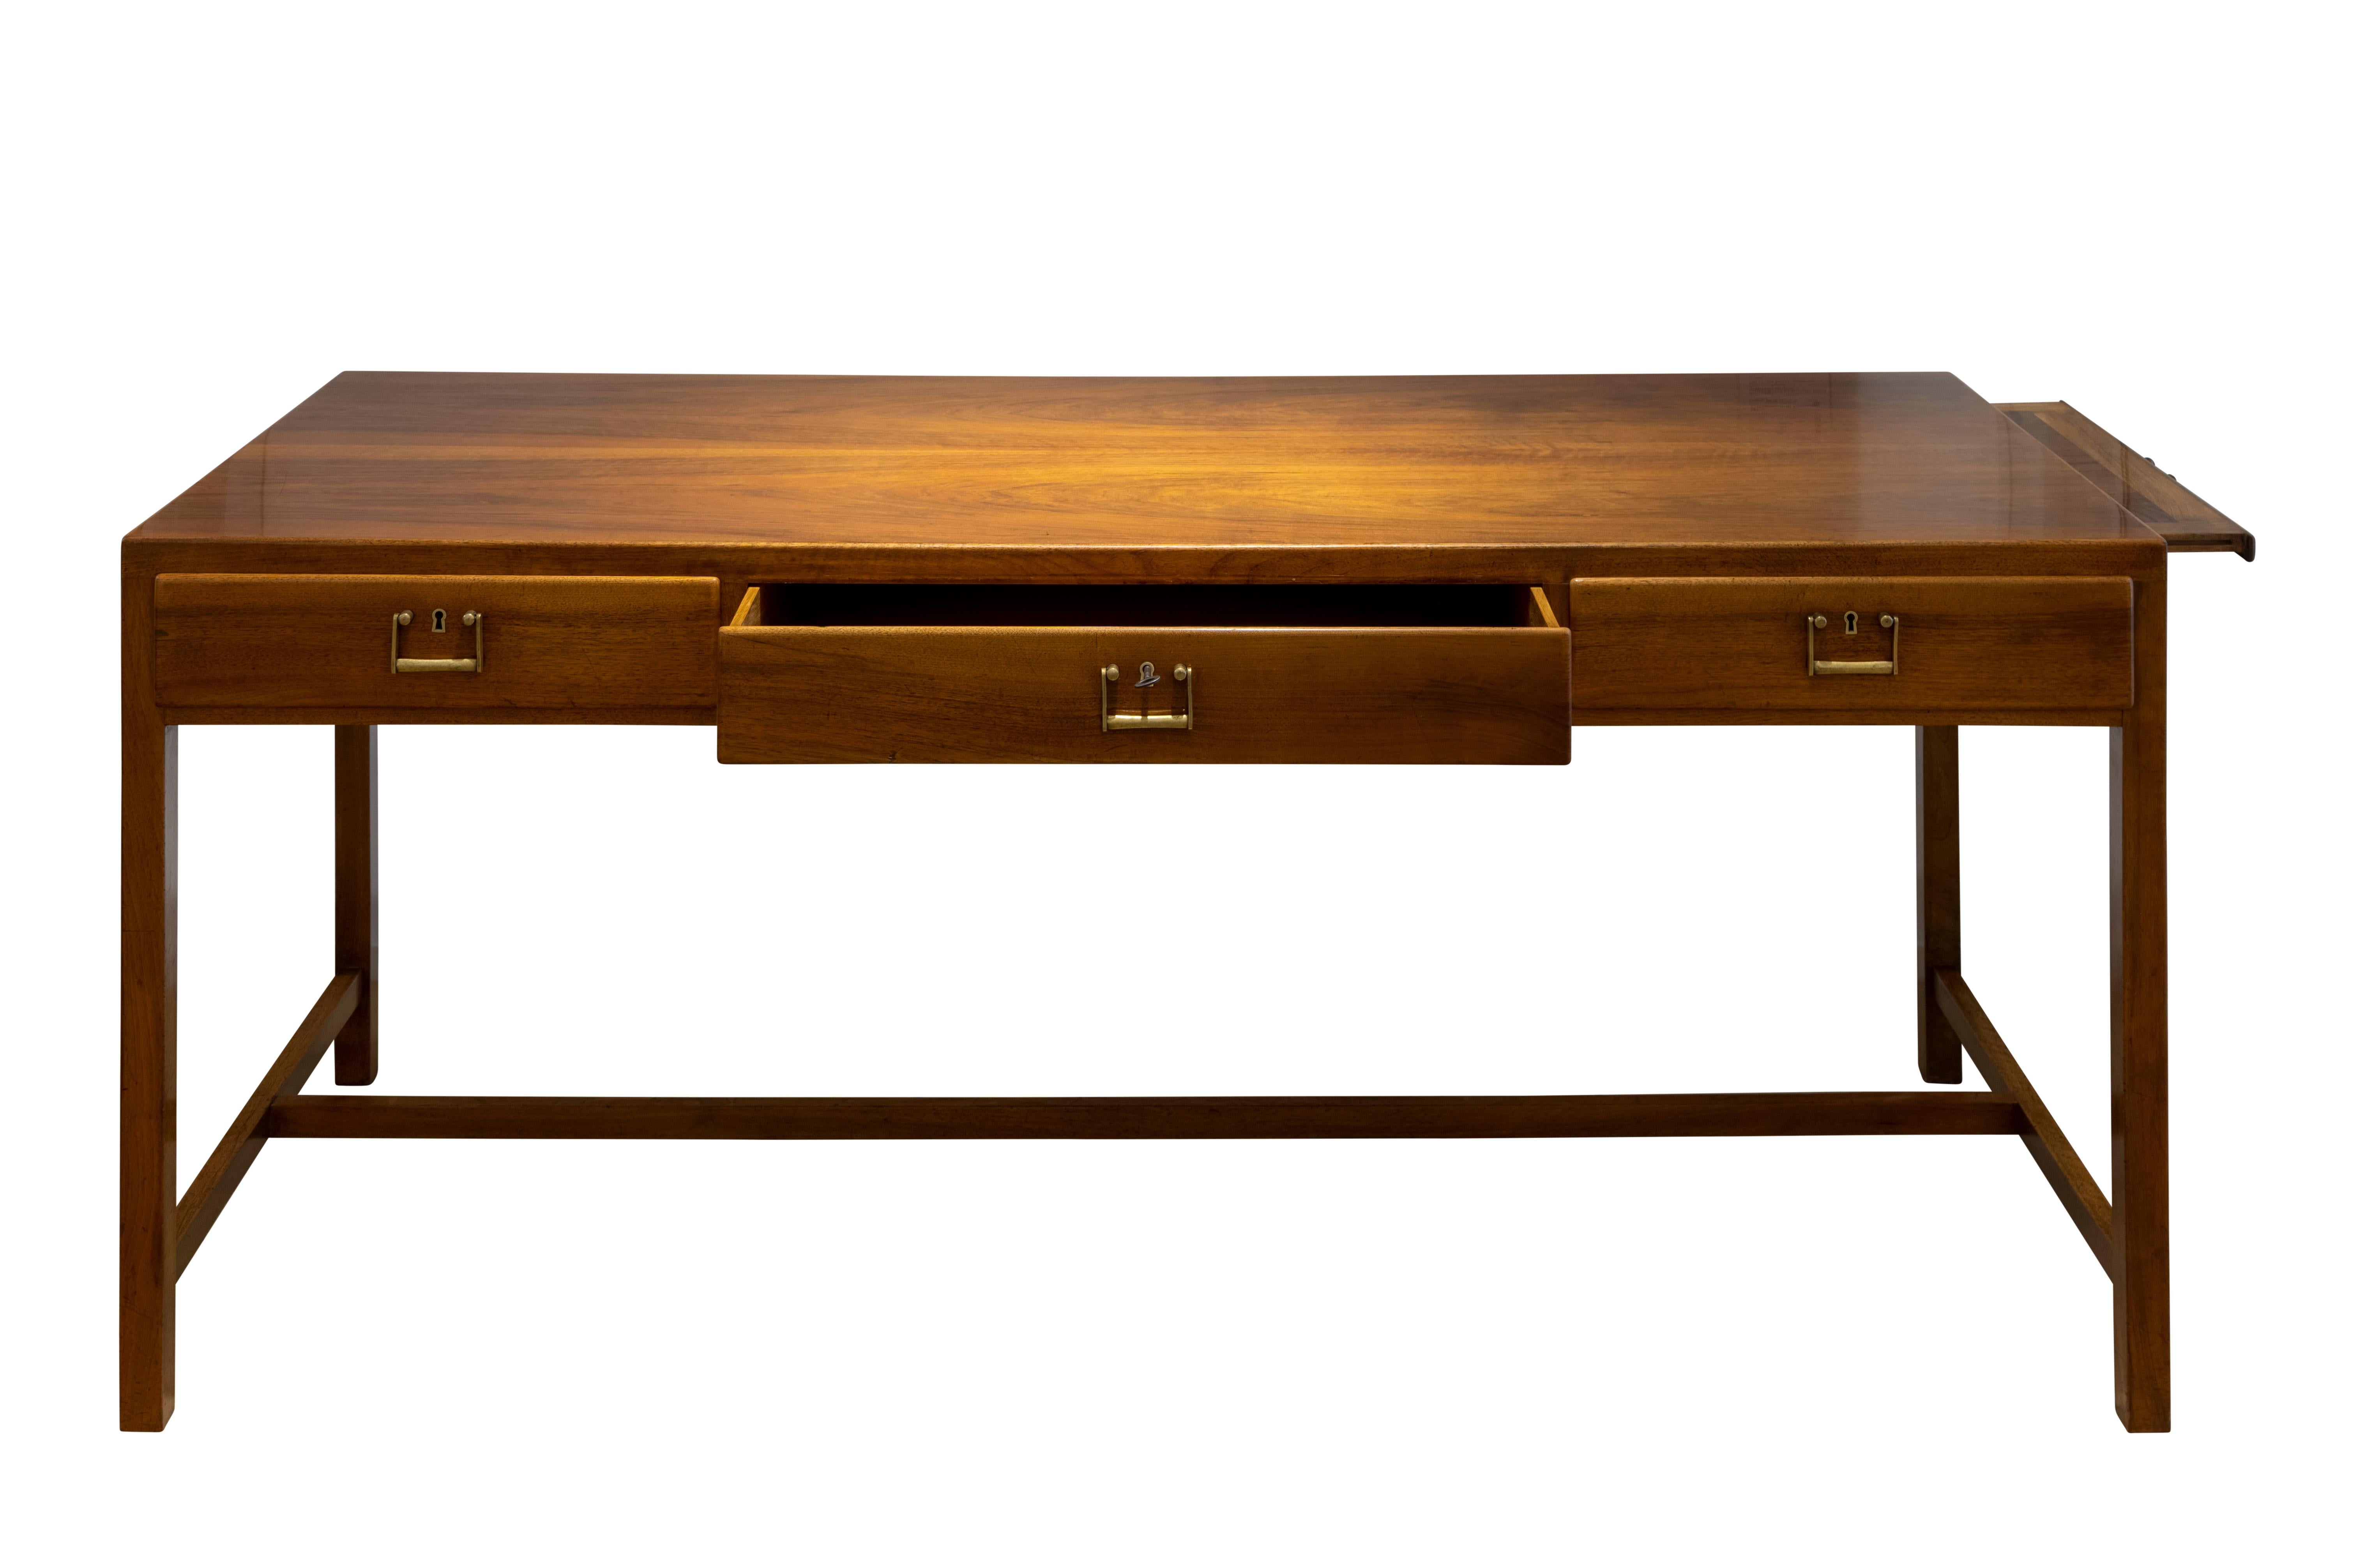 Desk with drawers, walnut with brass fittings, Austrian Modernism, Josef Frank, executed by Haus und Garten Frank & Wlach, circa 1933, minimalistic

Architect, designer and theorist Josef Frank was born in Baden near Vienna in 1885. He became an